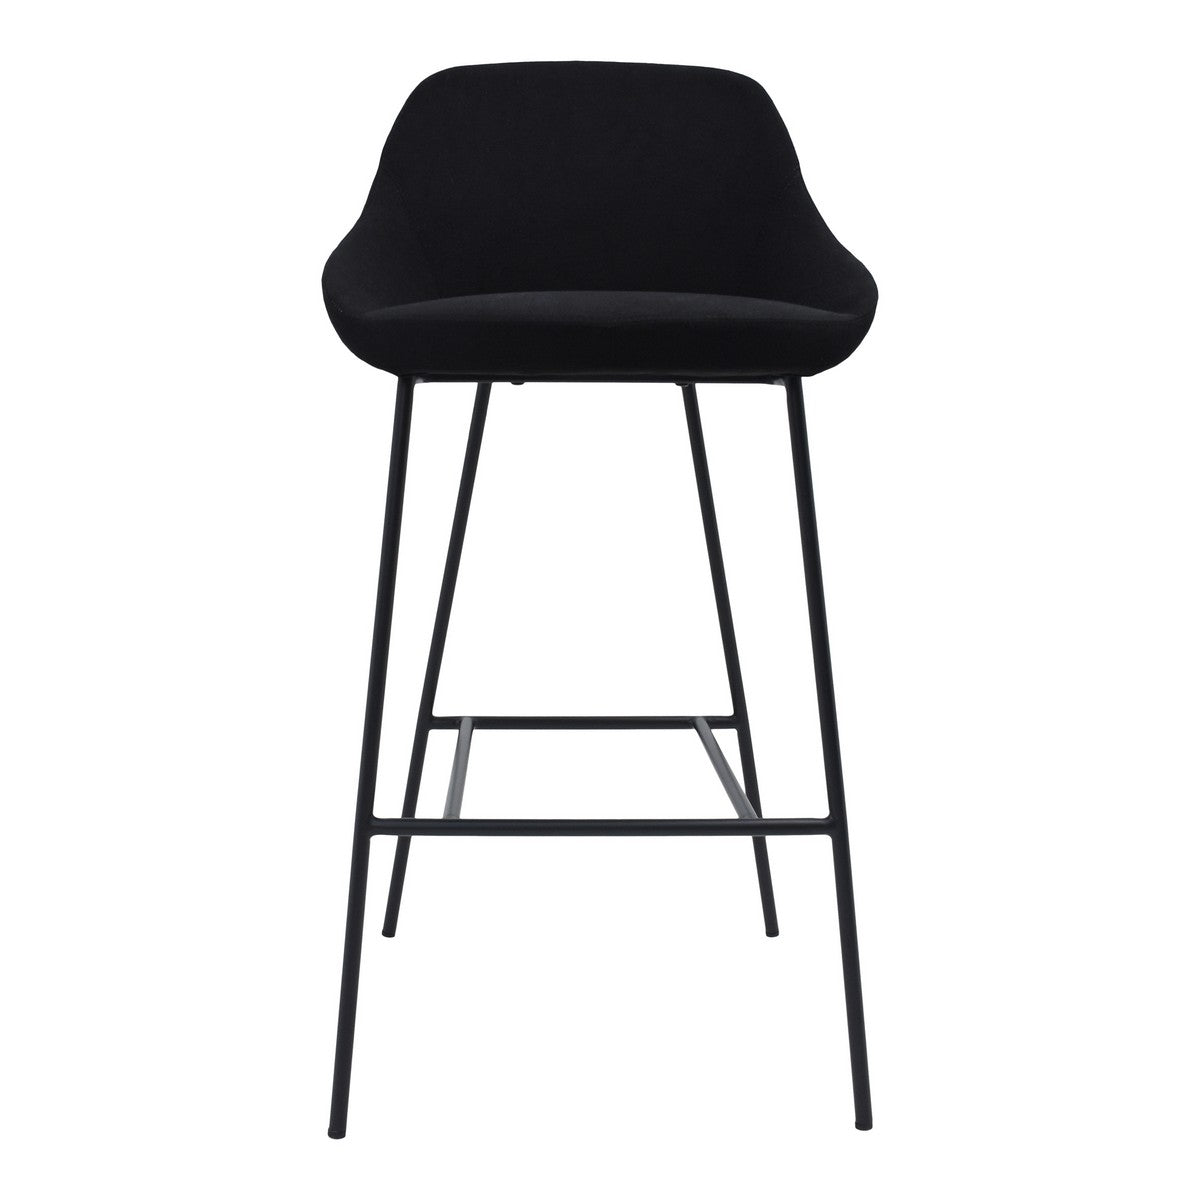 Moe's Home Collection Shelby Barstool Black - EJ-1039-02 - Moe's Home Collection - Bar Stools - Minimal And Modern - 1